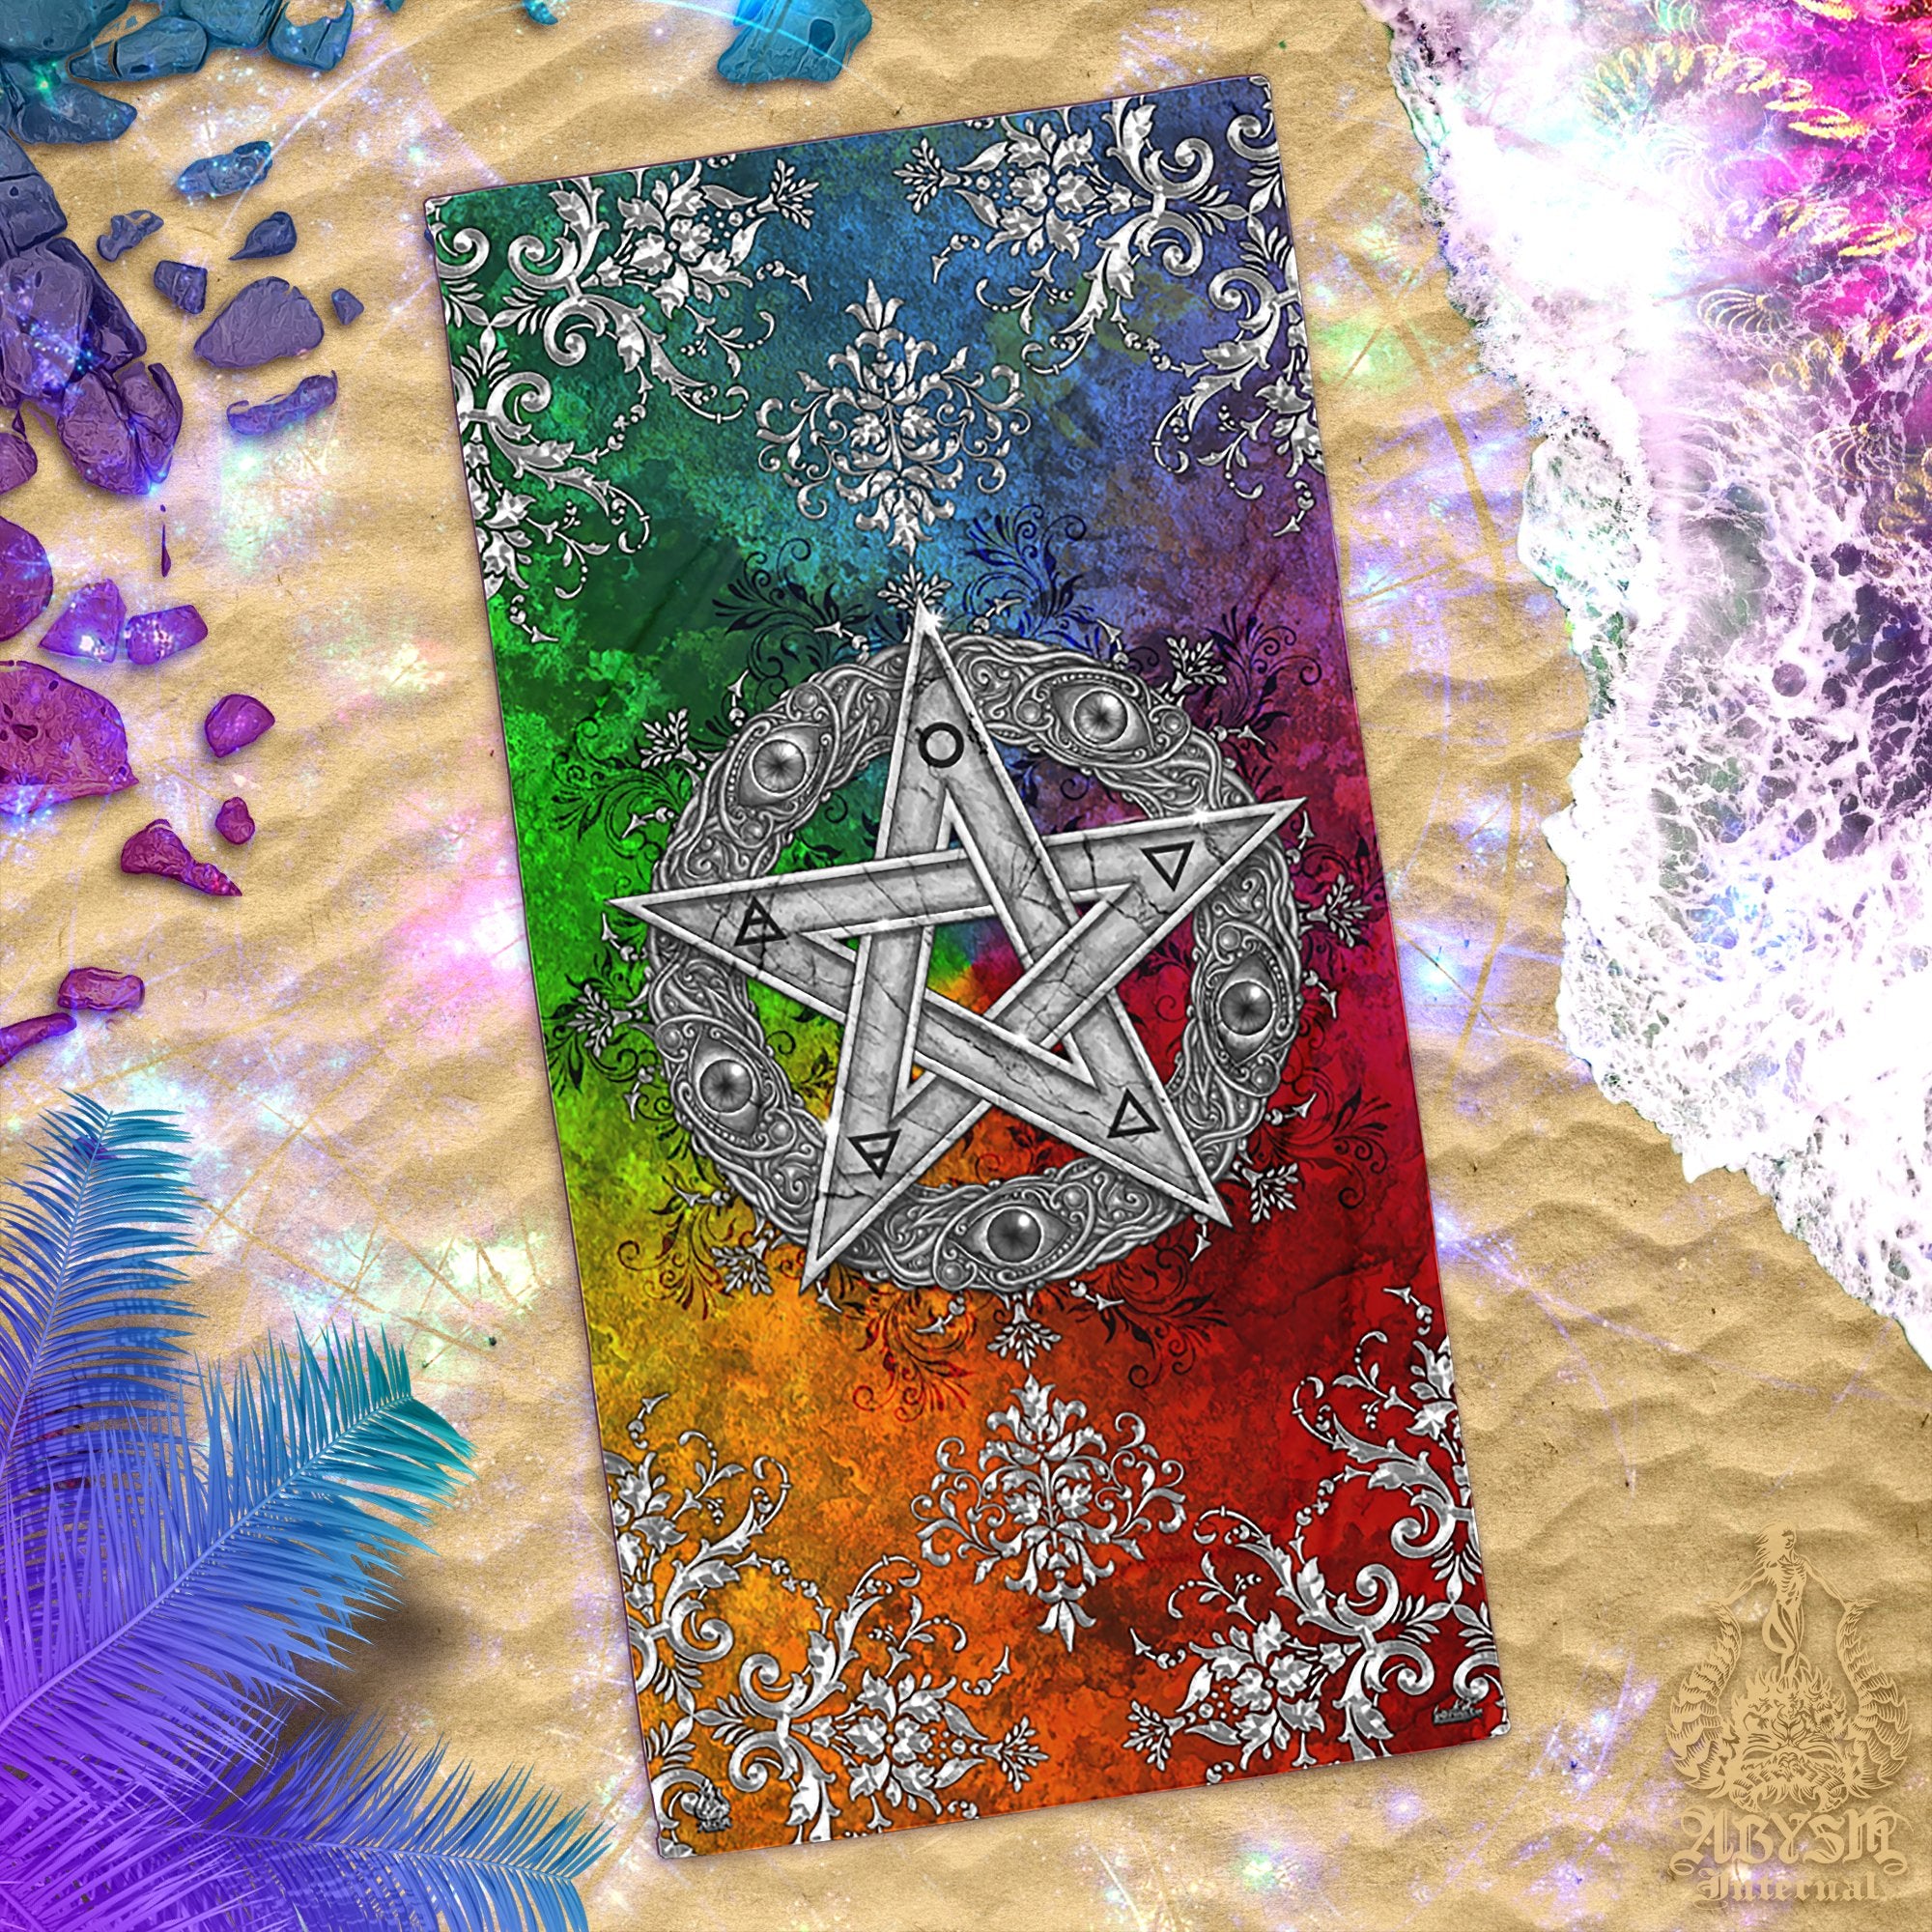 Pentacle Beach Towel, Wiccan Witch and Pagan - Gold & Silver - Abysm Internal